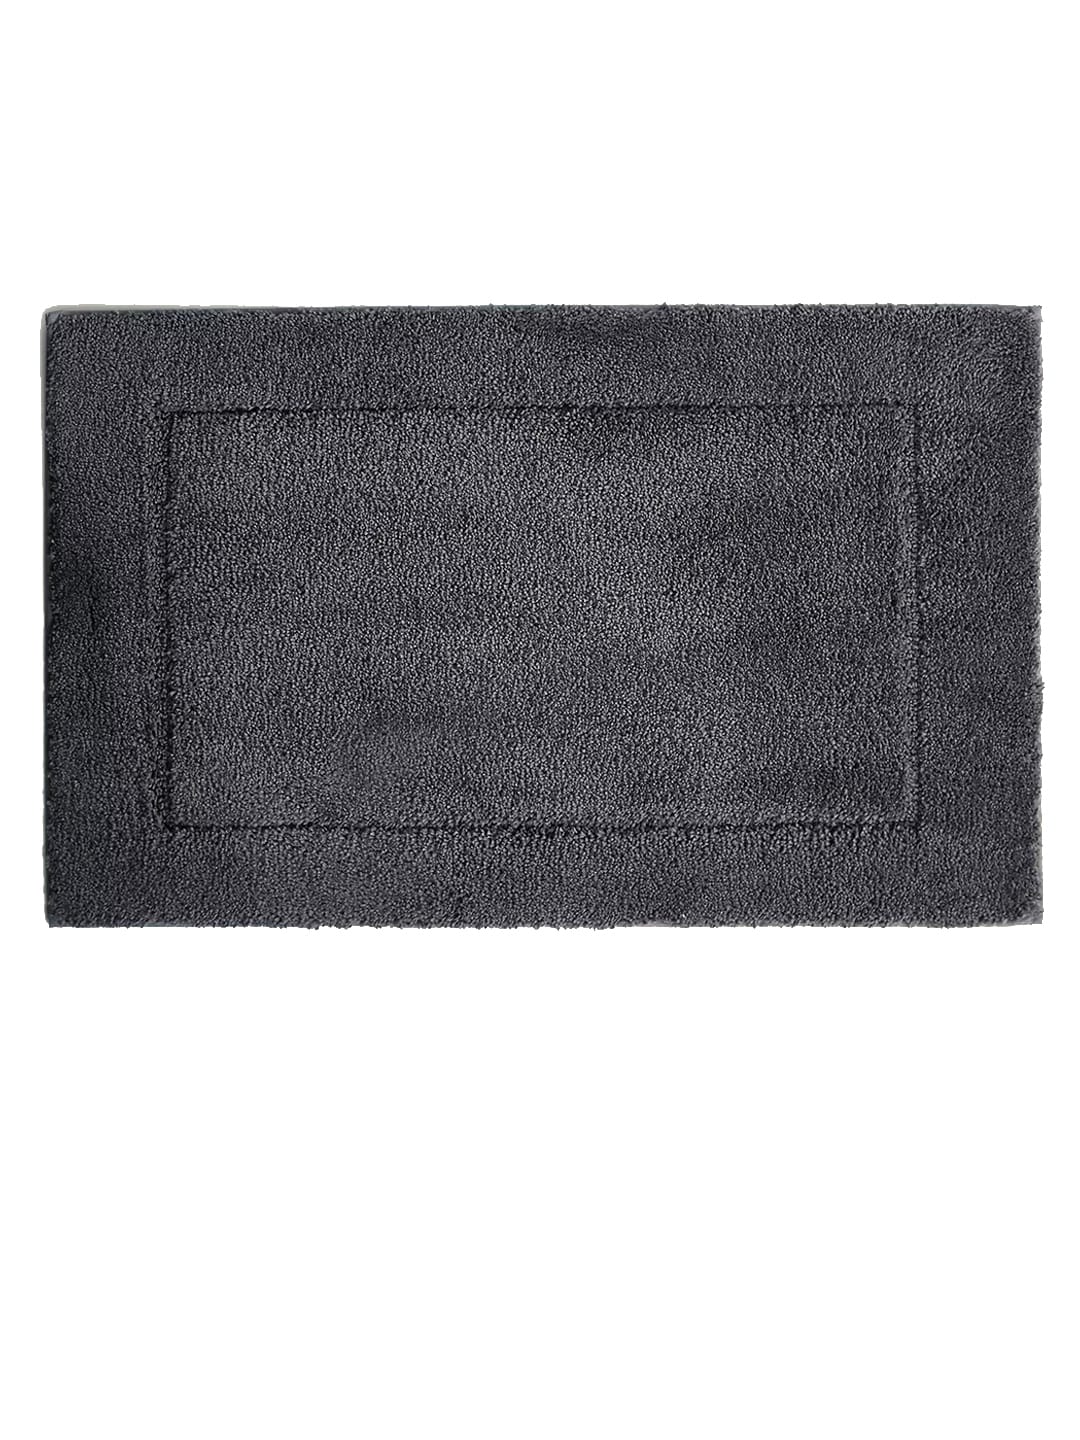 Marks & Spencer Charcoal 150 GSM Super Soft Quick Dry Bath Rug Price in India